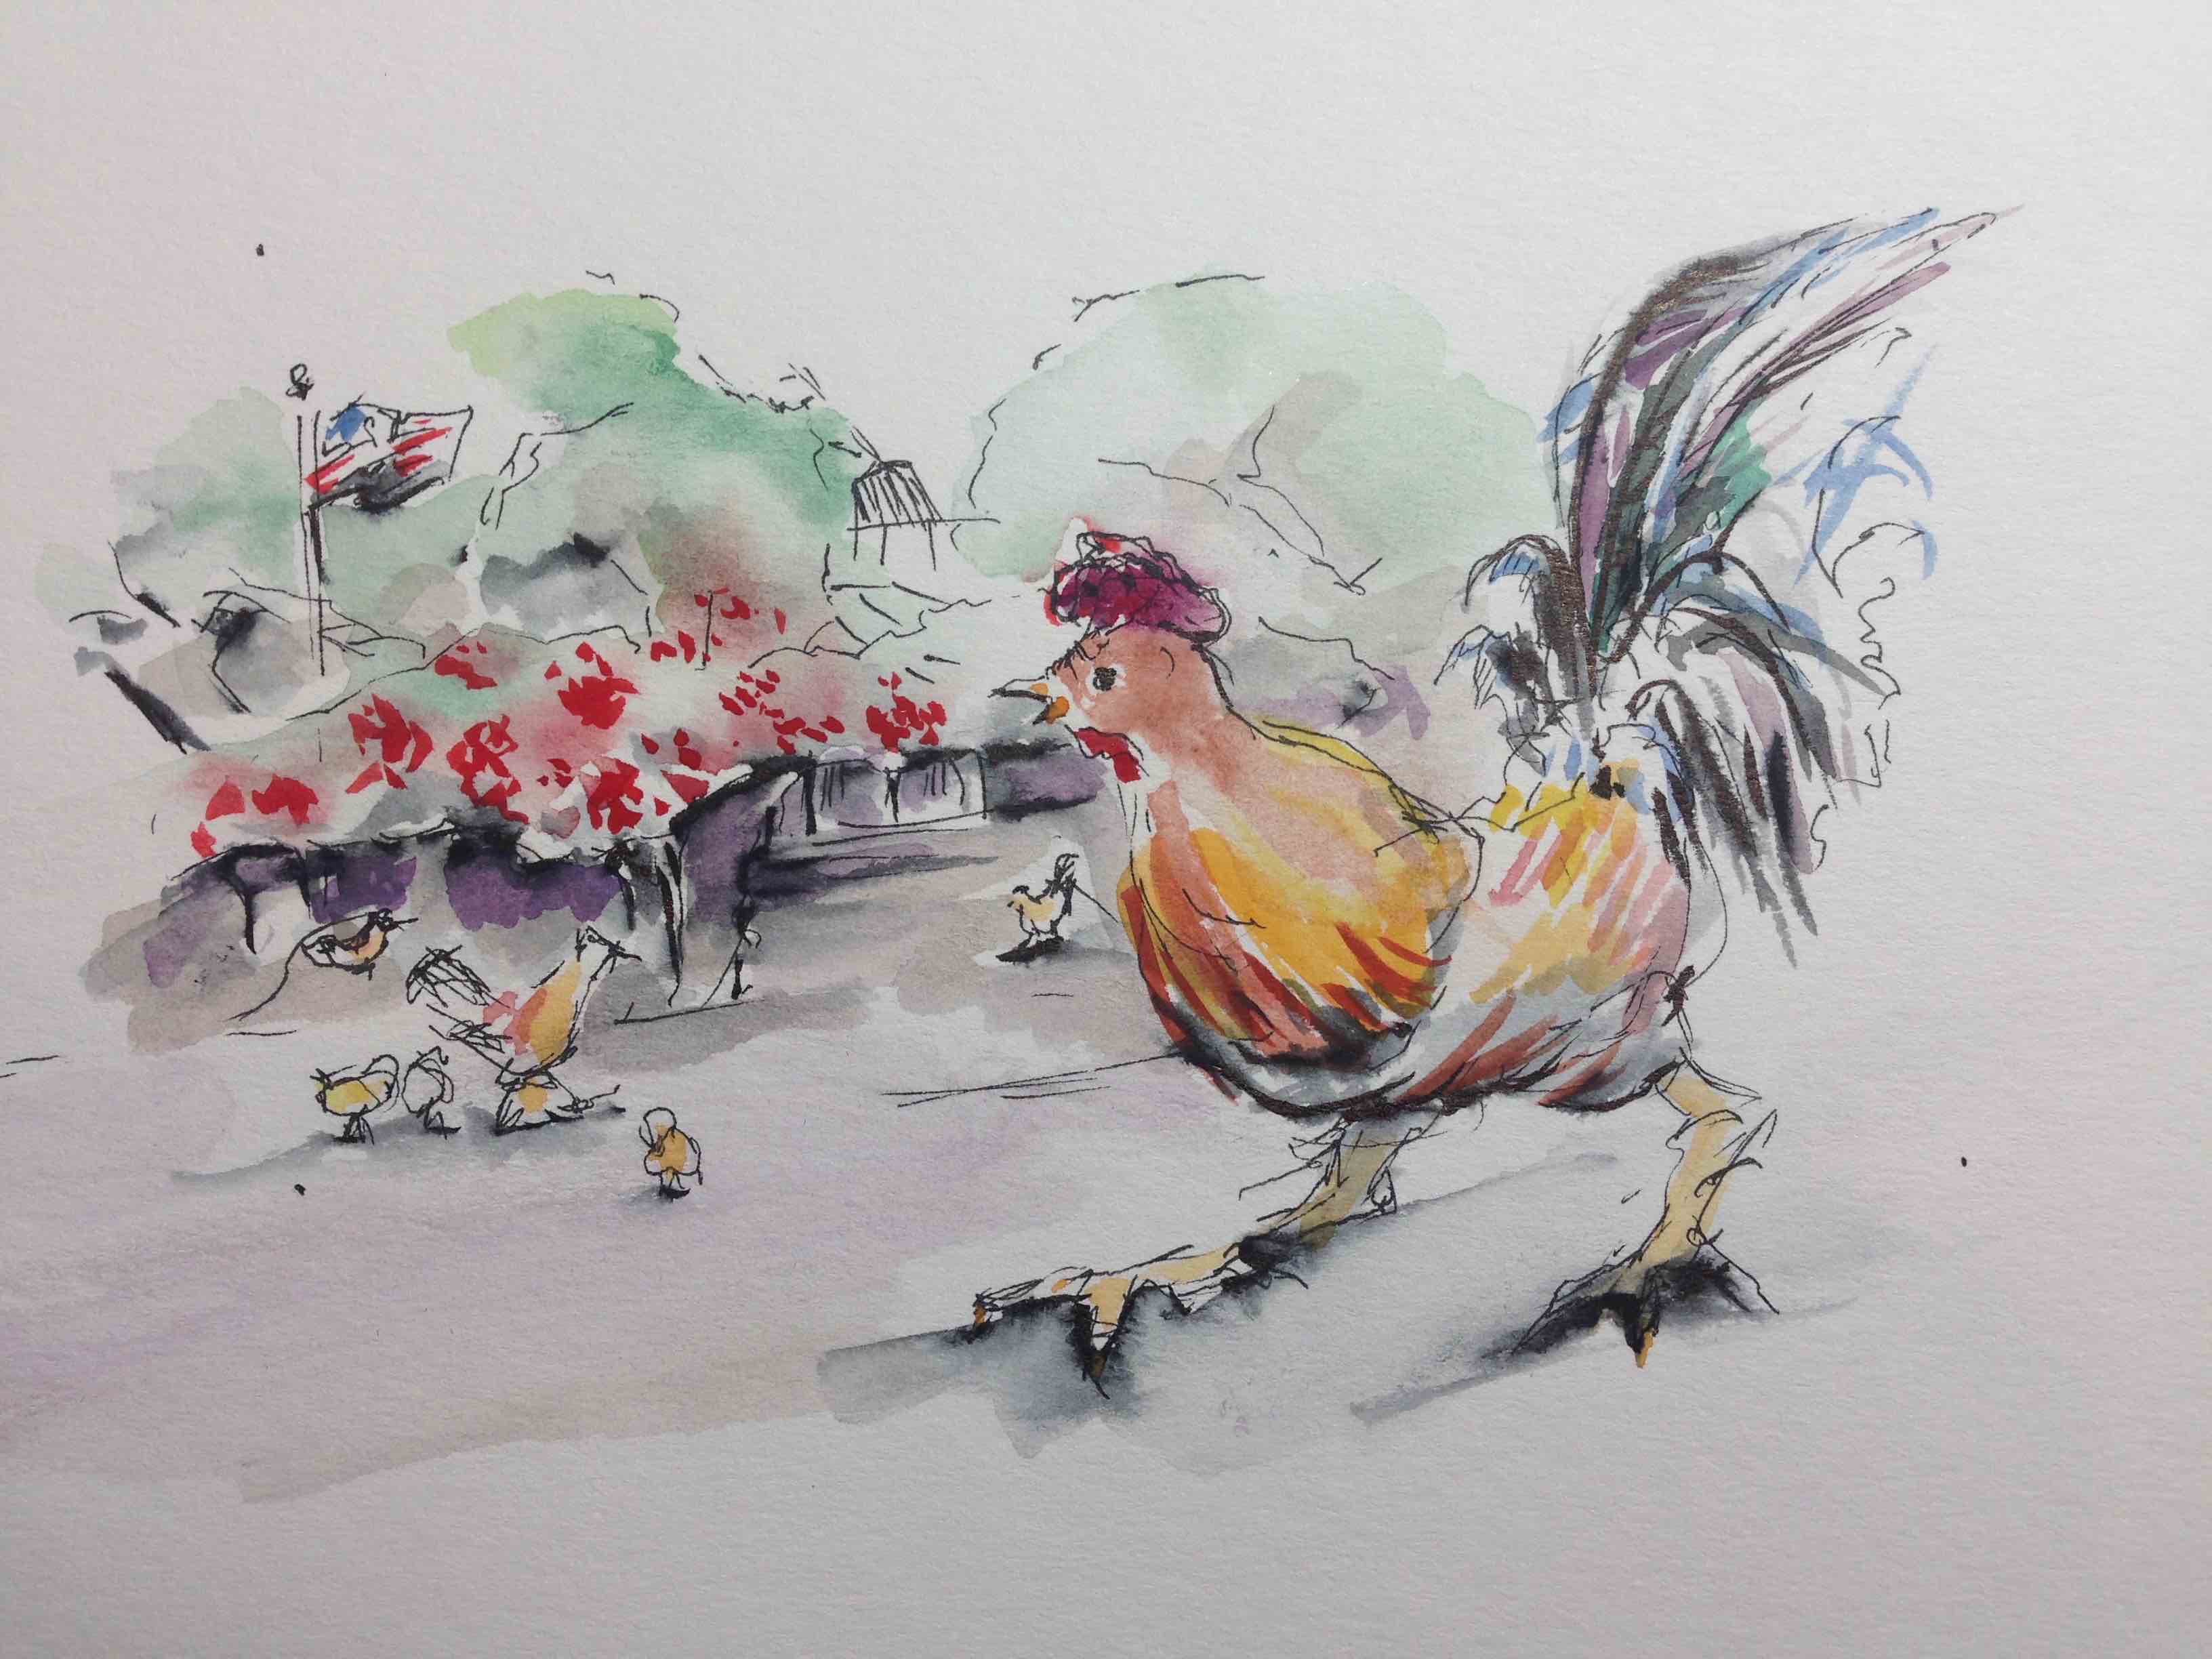 A former cartoonist, occasional parade organizer and ongoing designer of hats and accessories, Bradford’s ink and watercolor sketches capture the essence — and absurdity — of our island home.